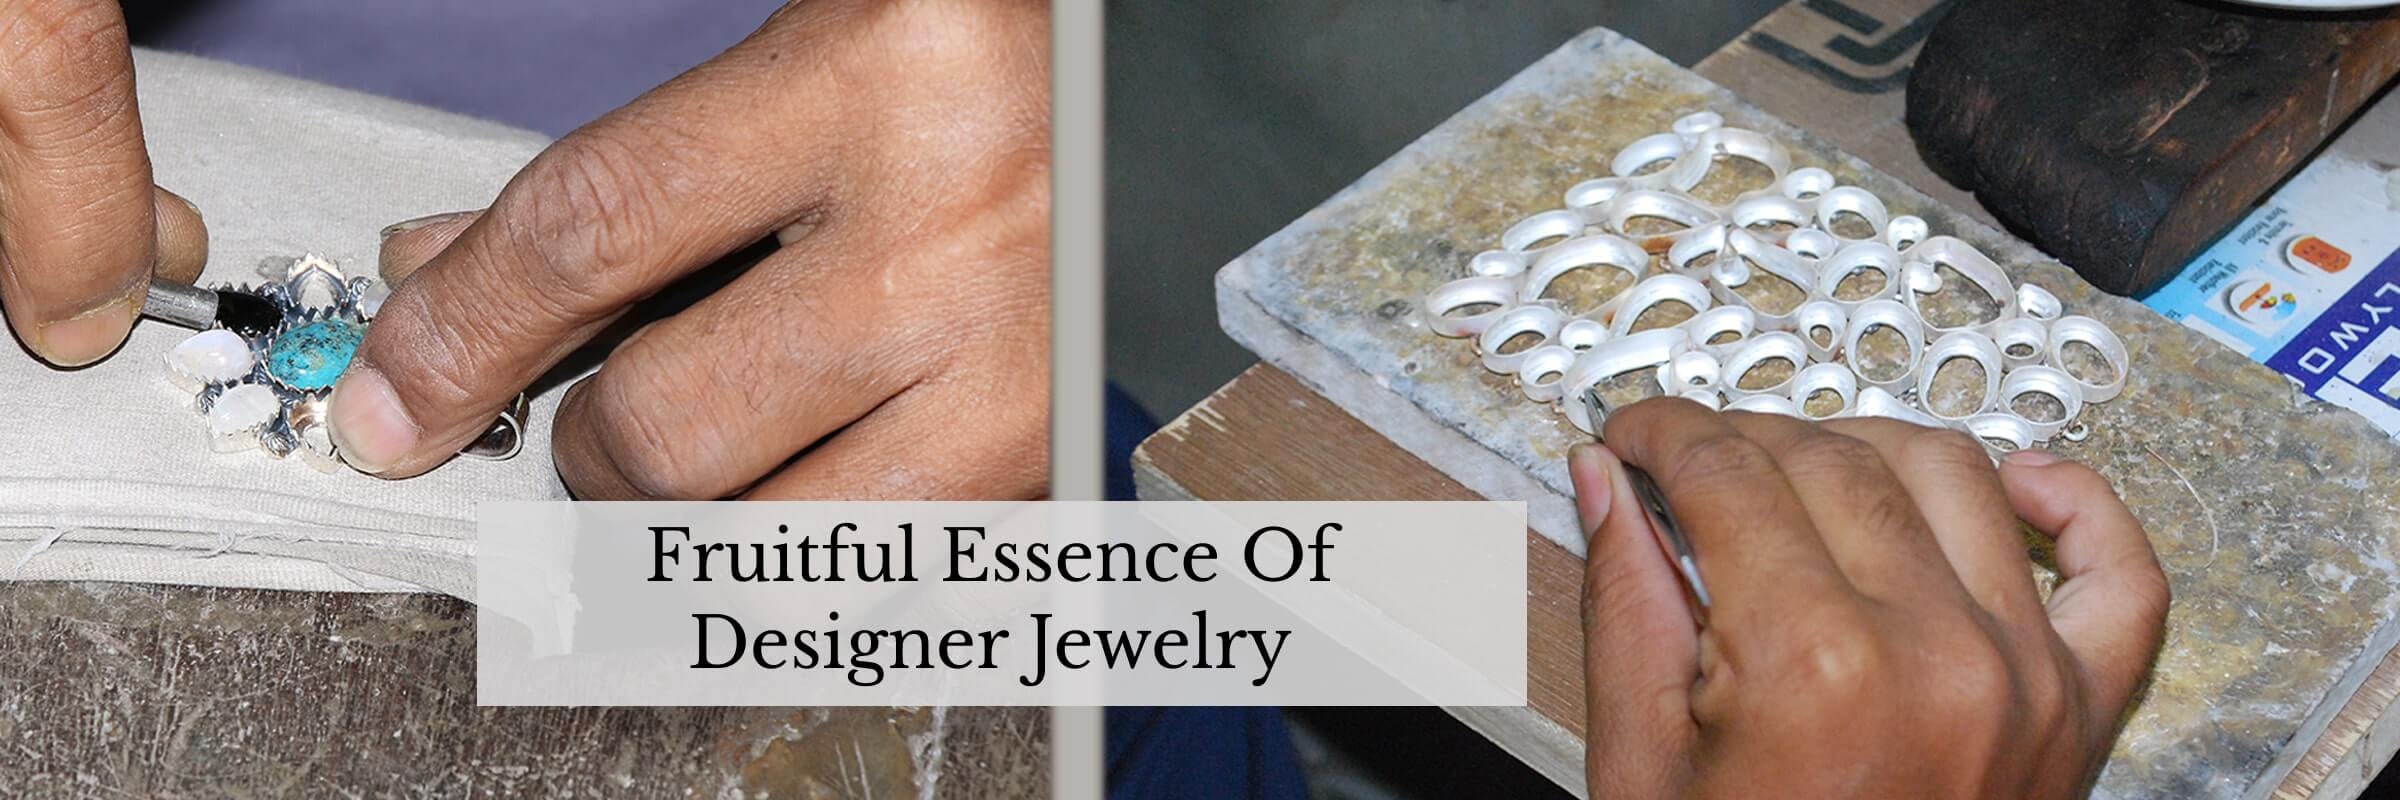 Presence Of Vibe In Designer Jewelry - Beyond Imagination